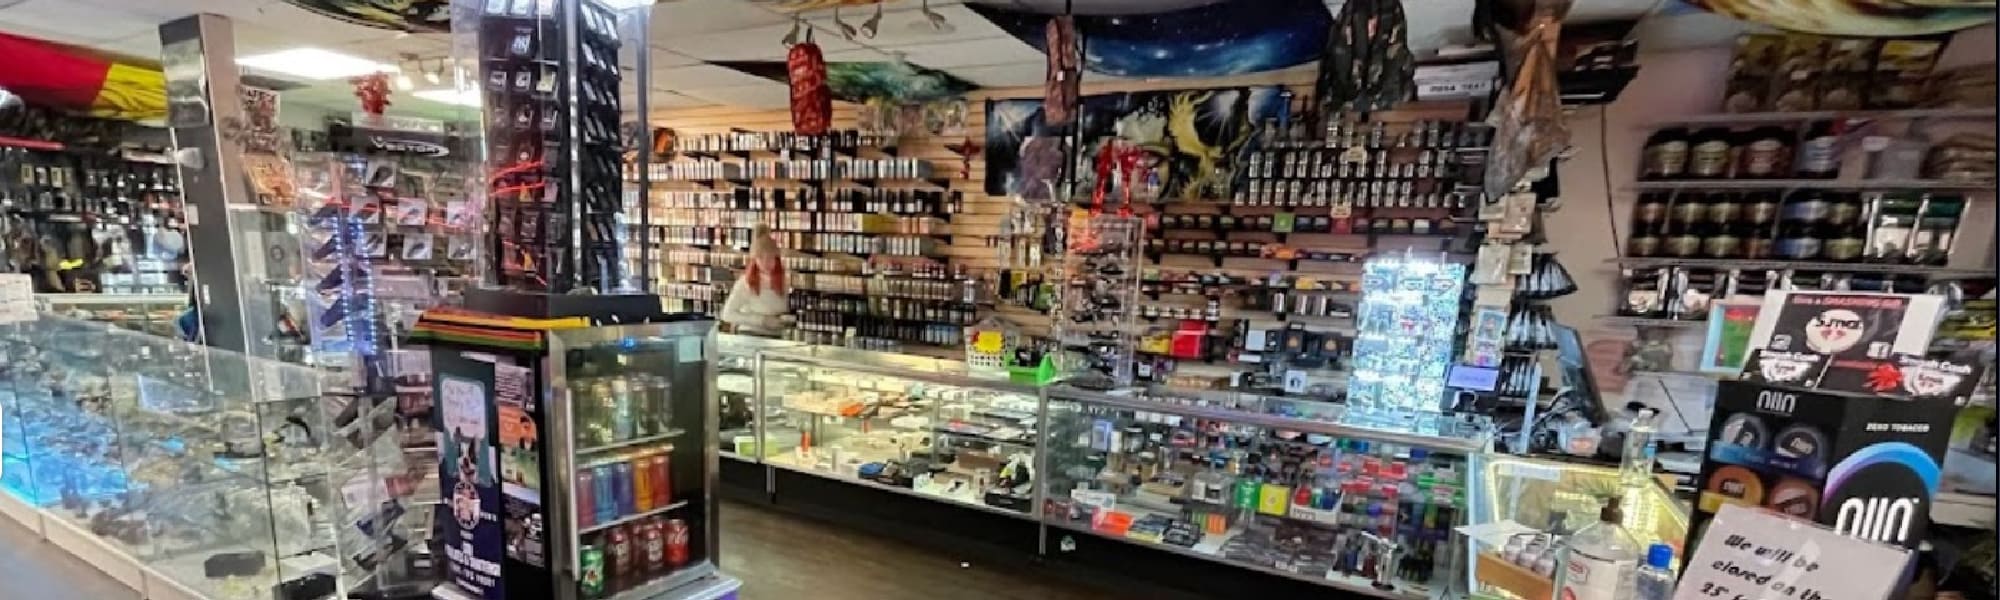 image of smash glass and vape in aurora colorado